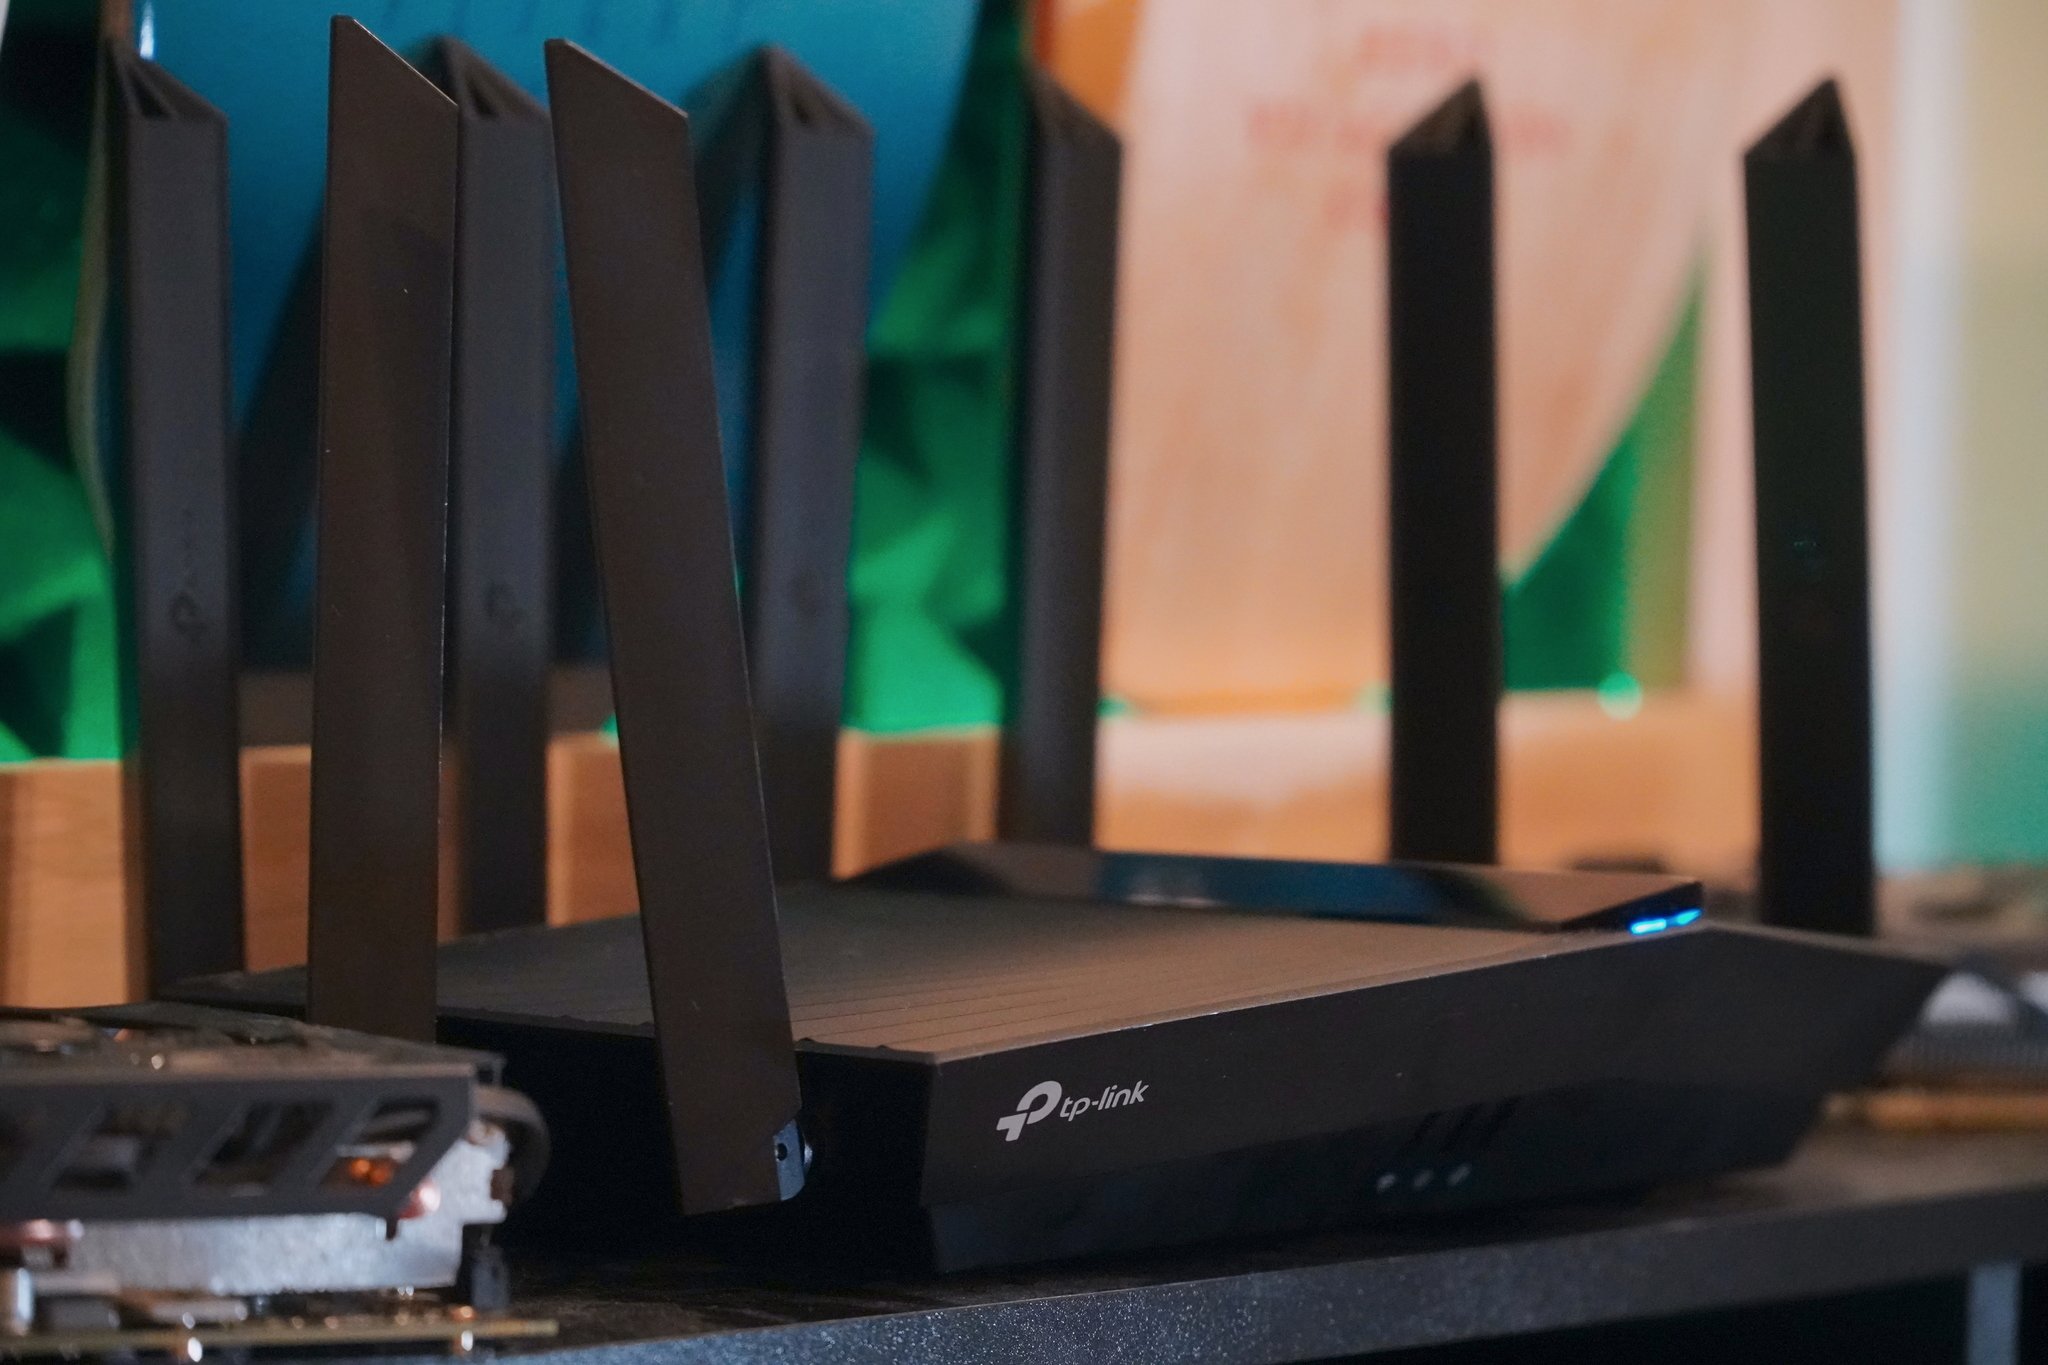 Should you buy a Wi-Fi 6 router in 2021?